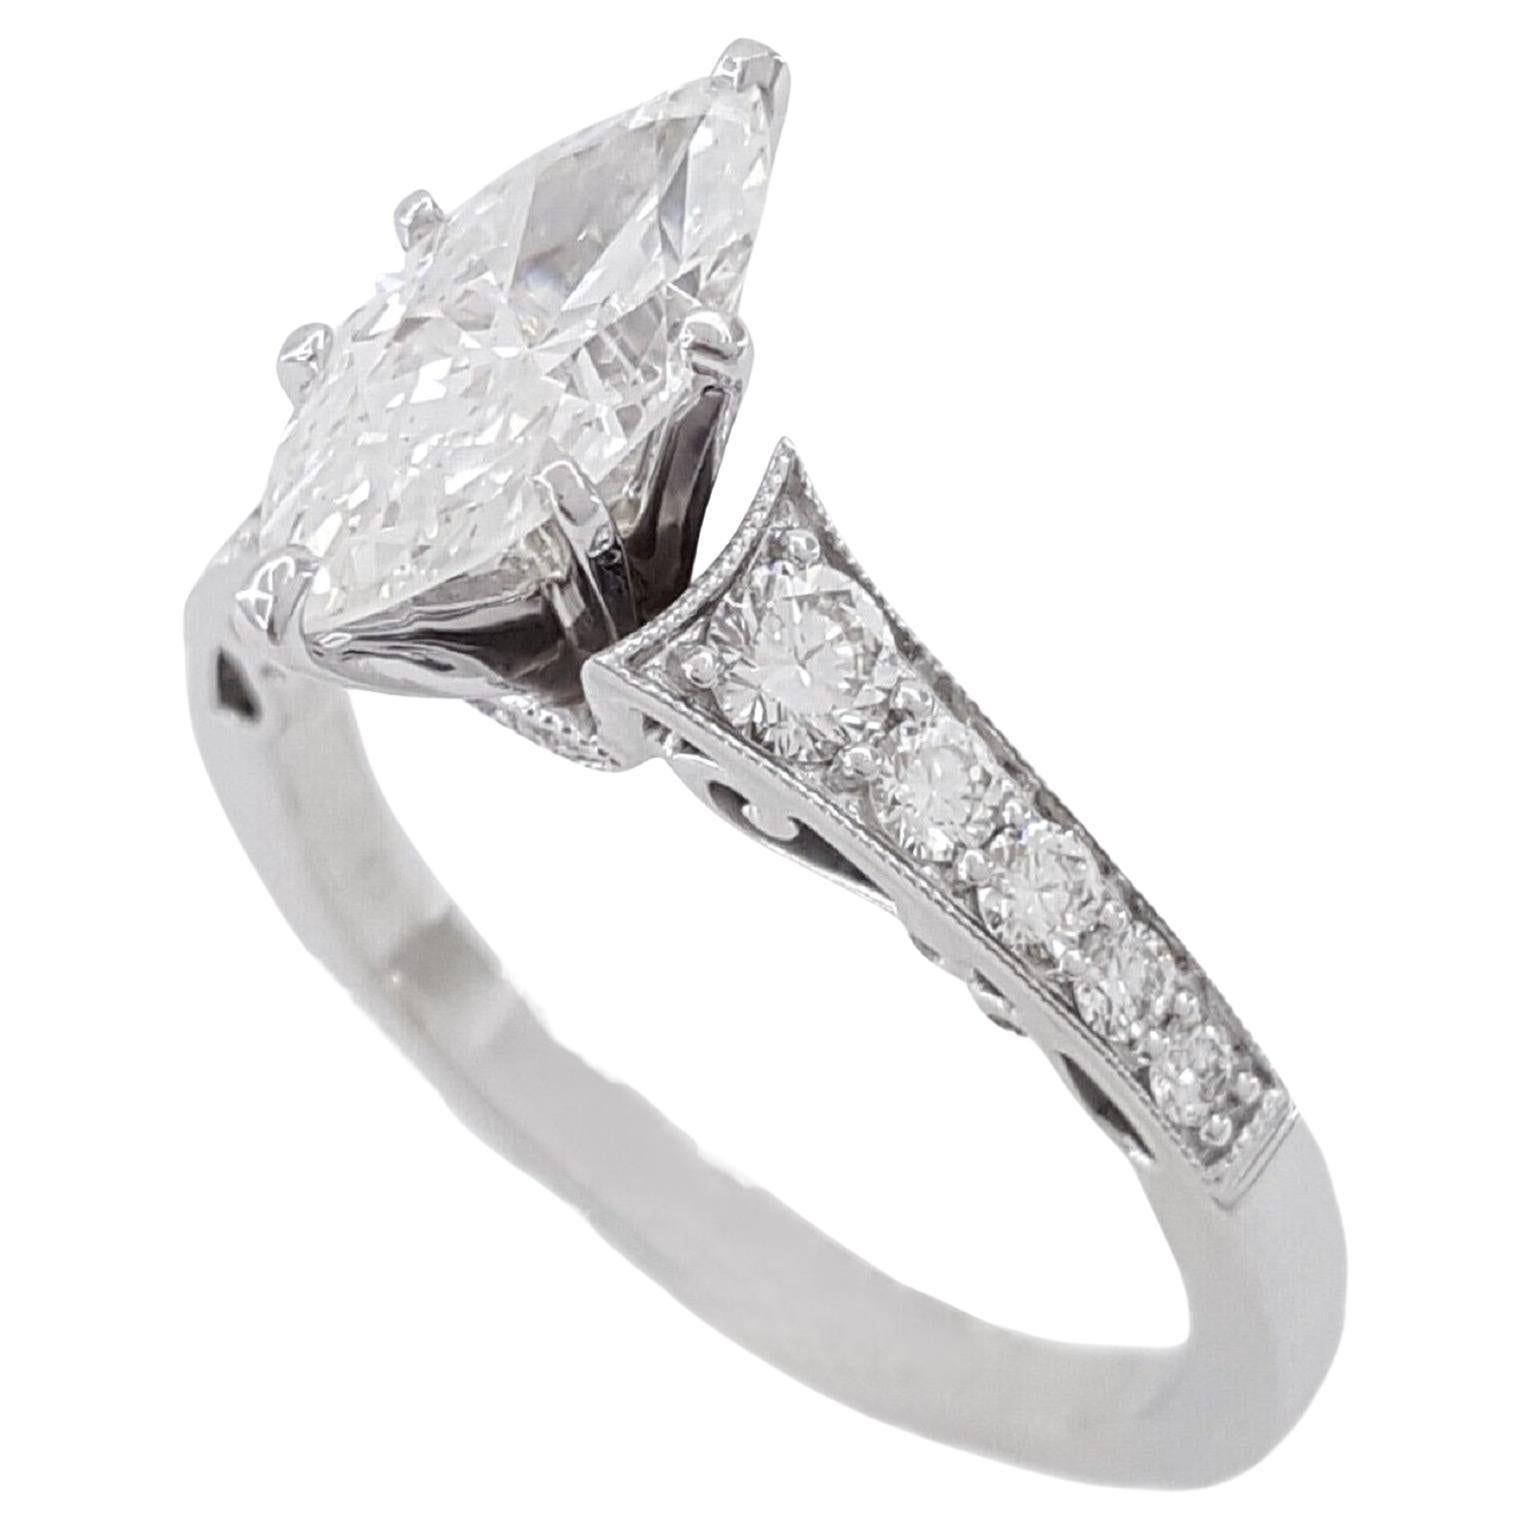 Marquise Brilliant Cut Diamond Engagement Ring in 14K White Gold. 



The ring weighs 4.5 grams, size 8.25, the center stone is a Natural Marquise Brilliant Cut diamond weighing 1.34 ct, I in color, SI1 in clarity